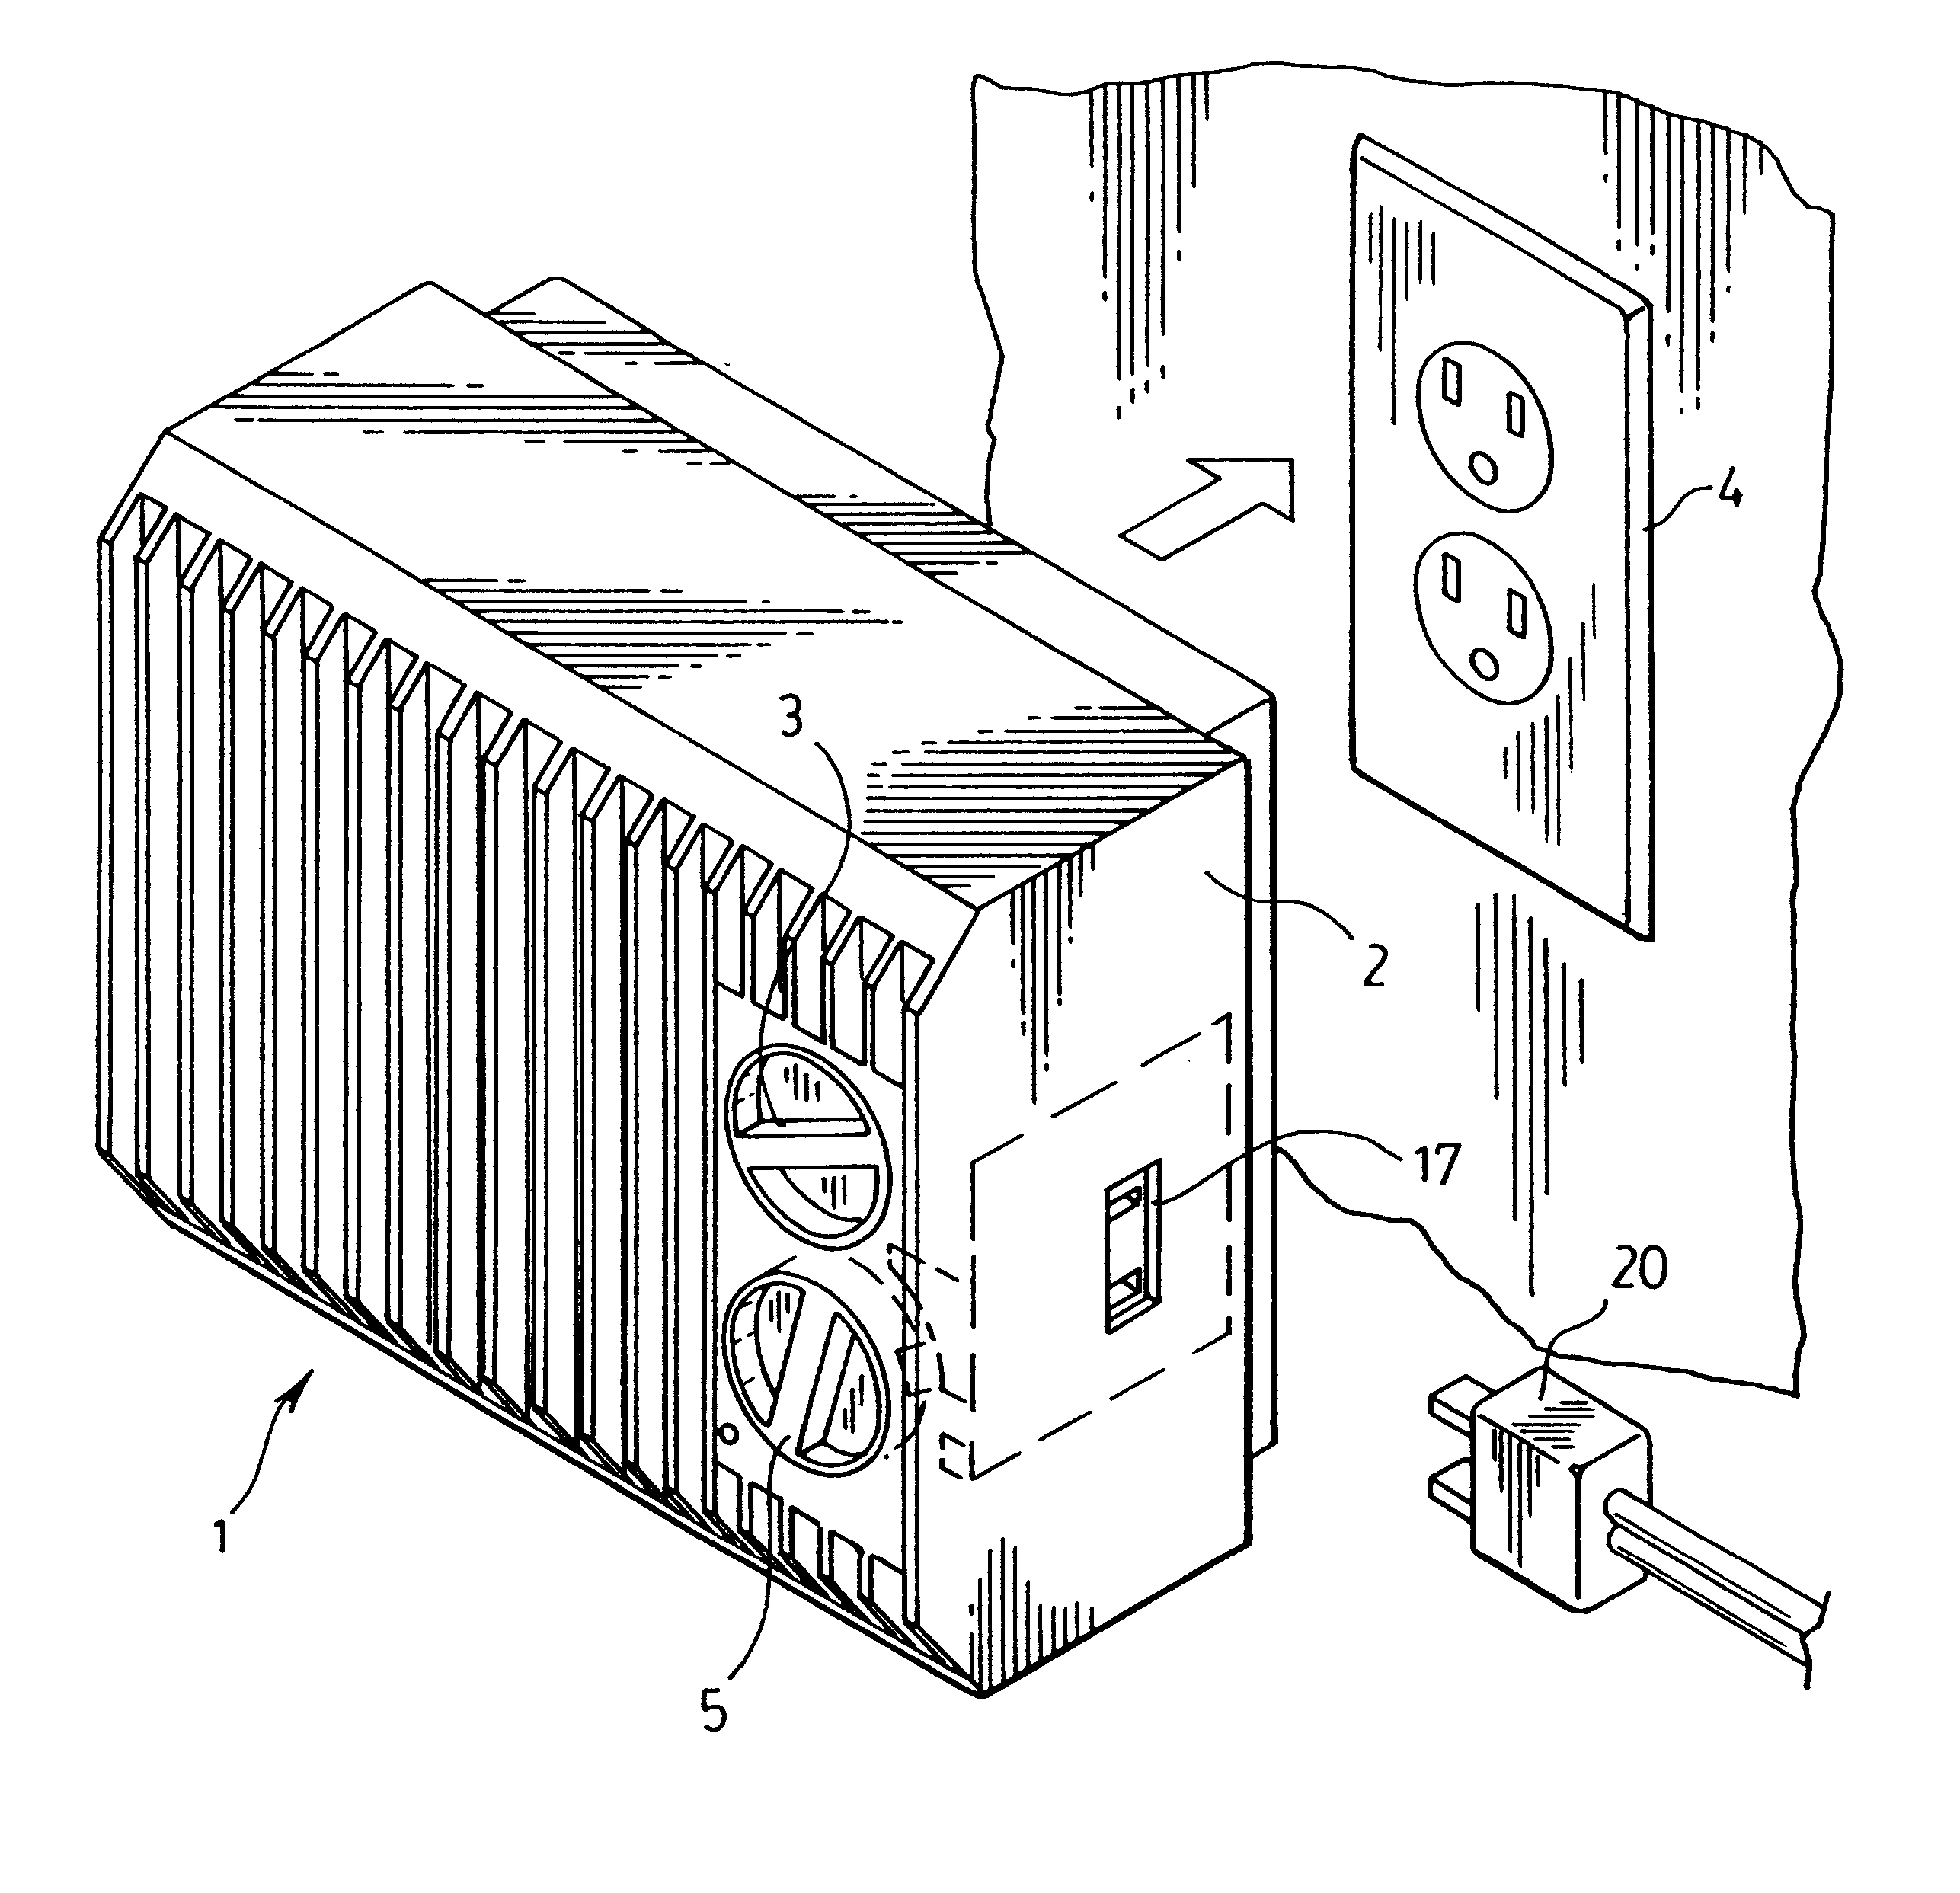 Wall mounted heater fan with electrical outlet